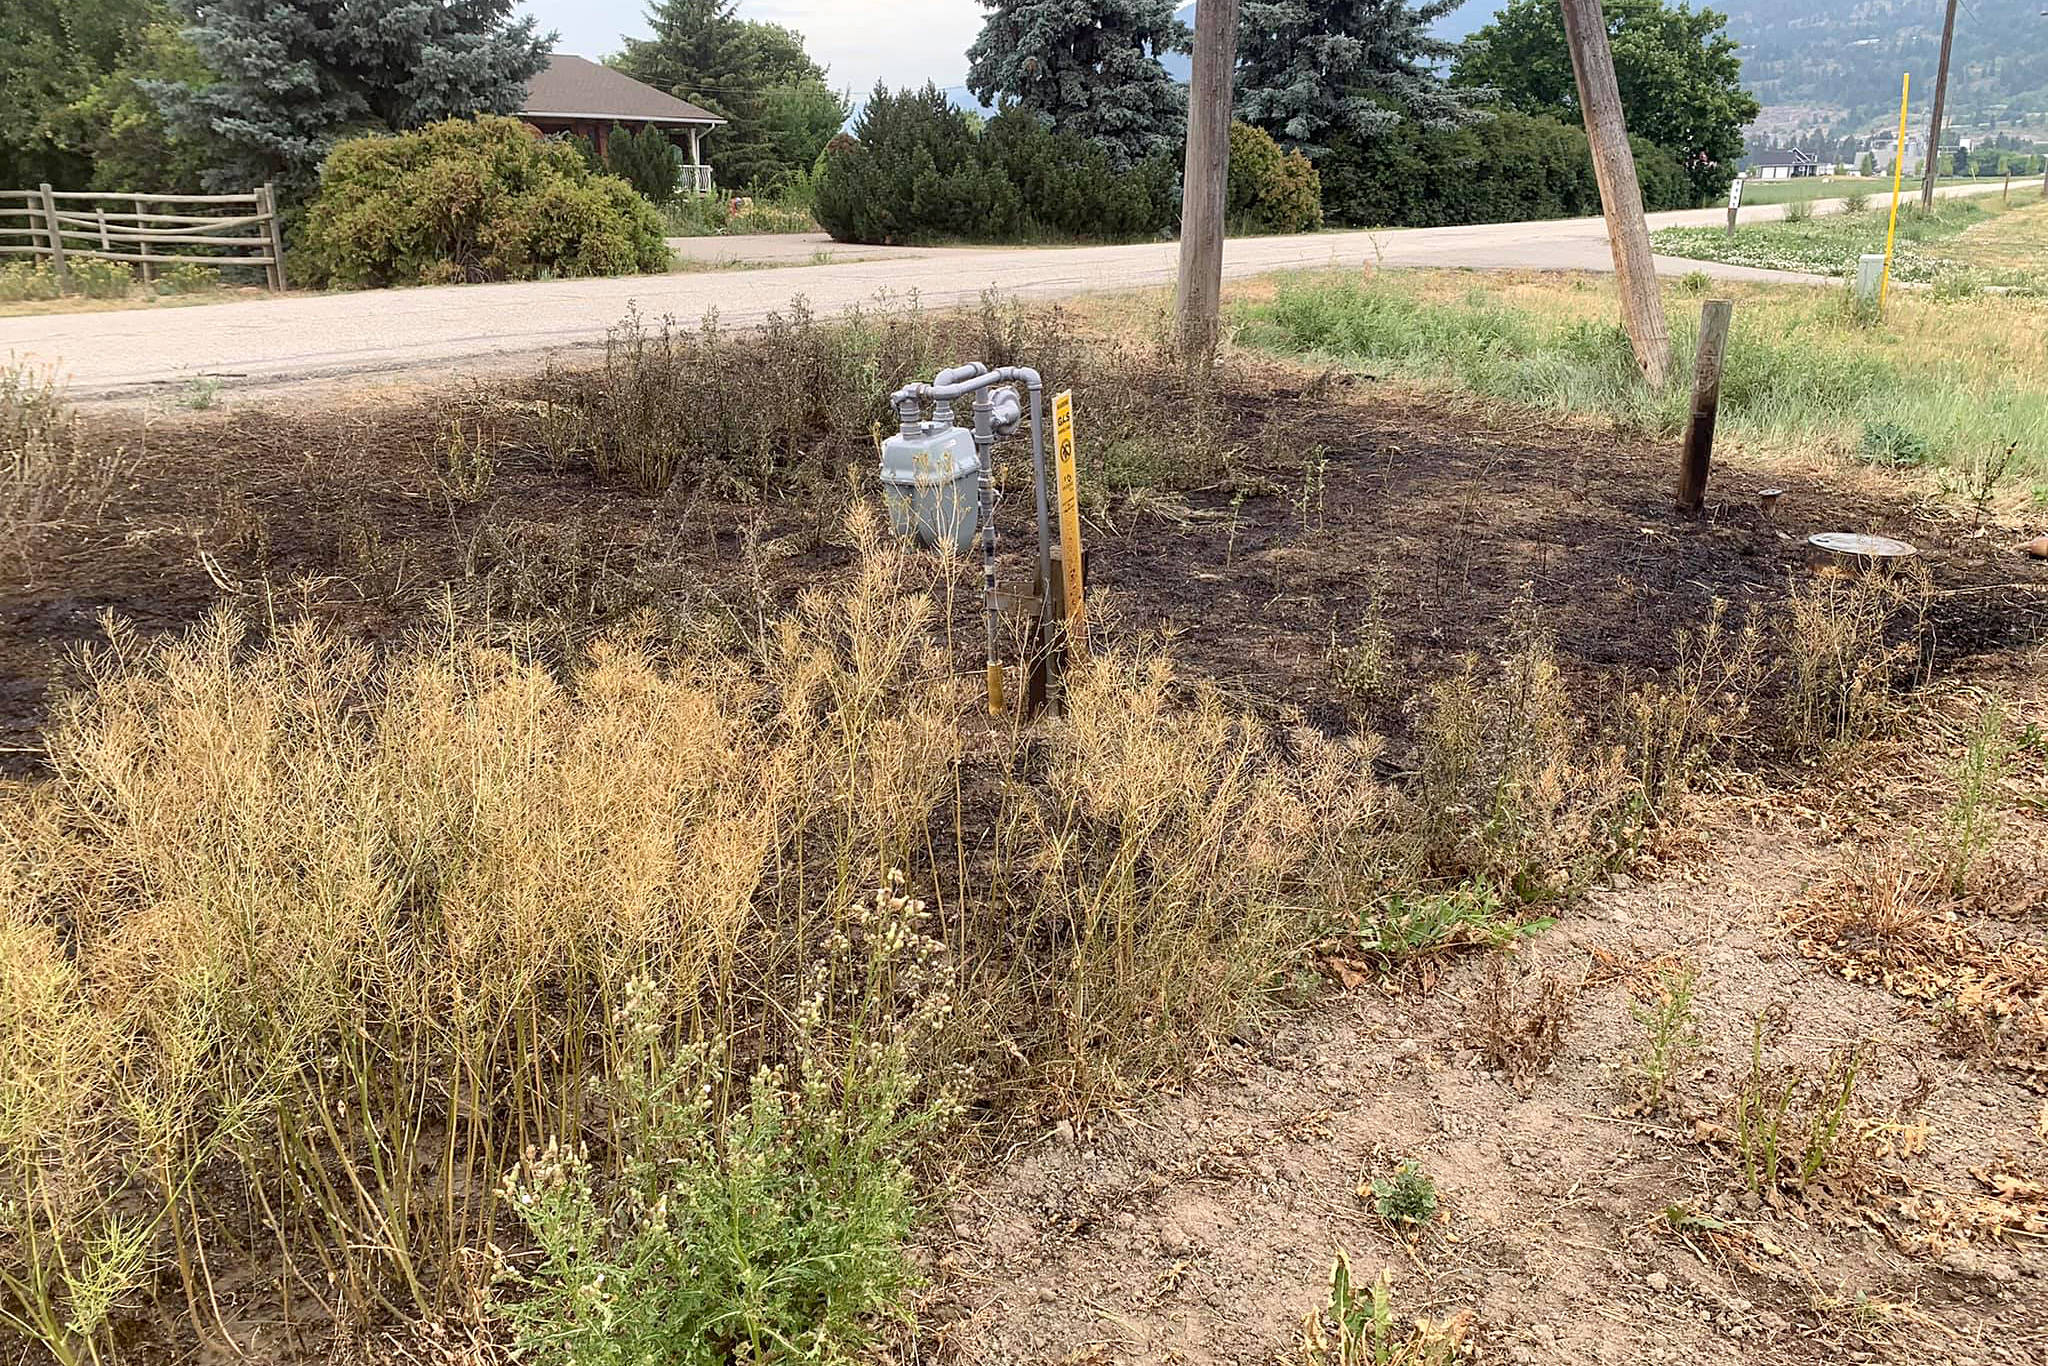 A grass fire was sparked in Armstrong, suspected to be caused by someone driving by and discarding a cigarette butt. (Clint Attfield photo)